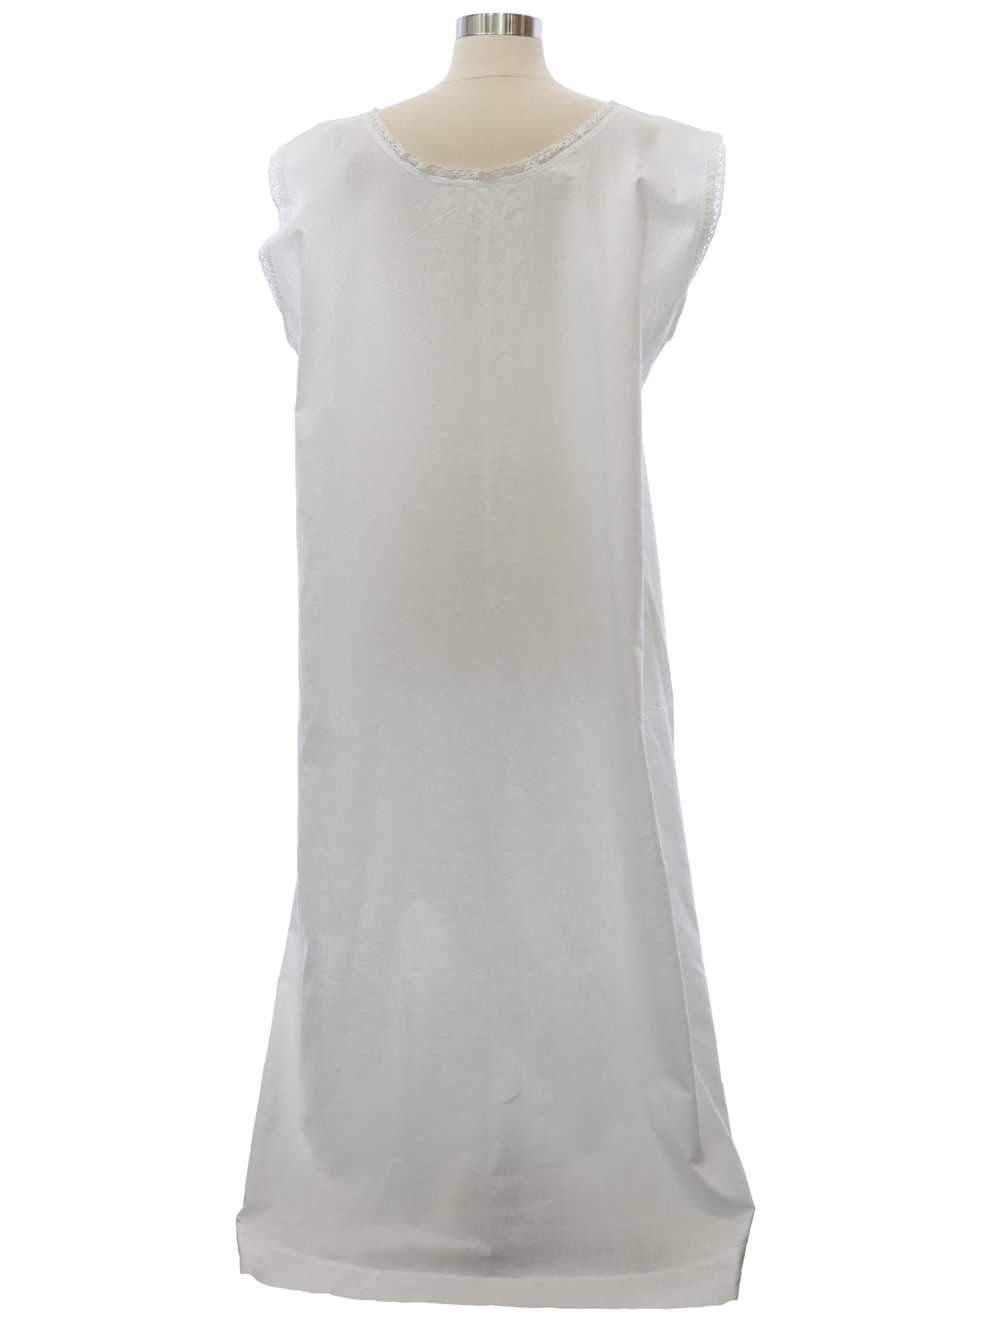 1920's Womens Lingerie - Nightgown - image 3